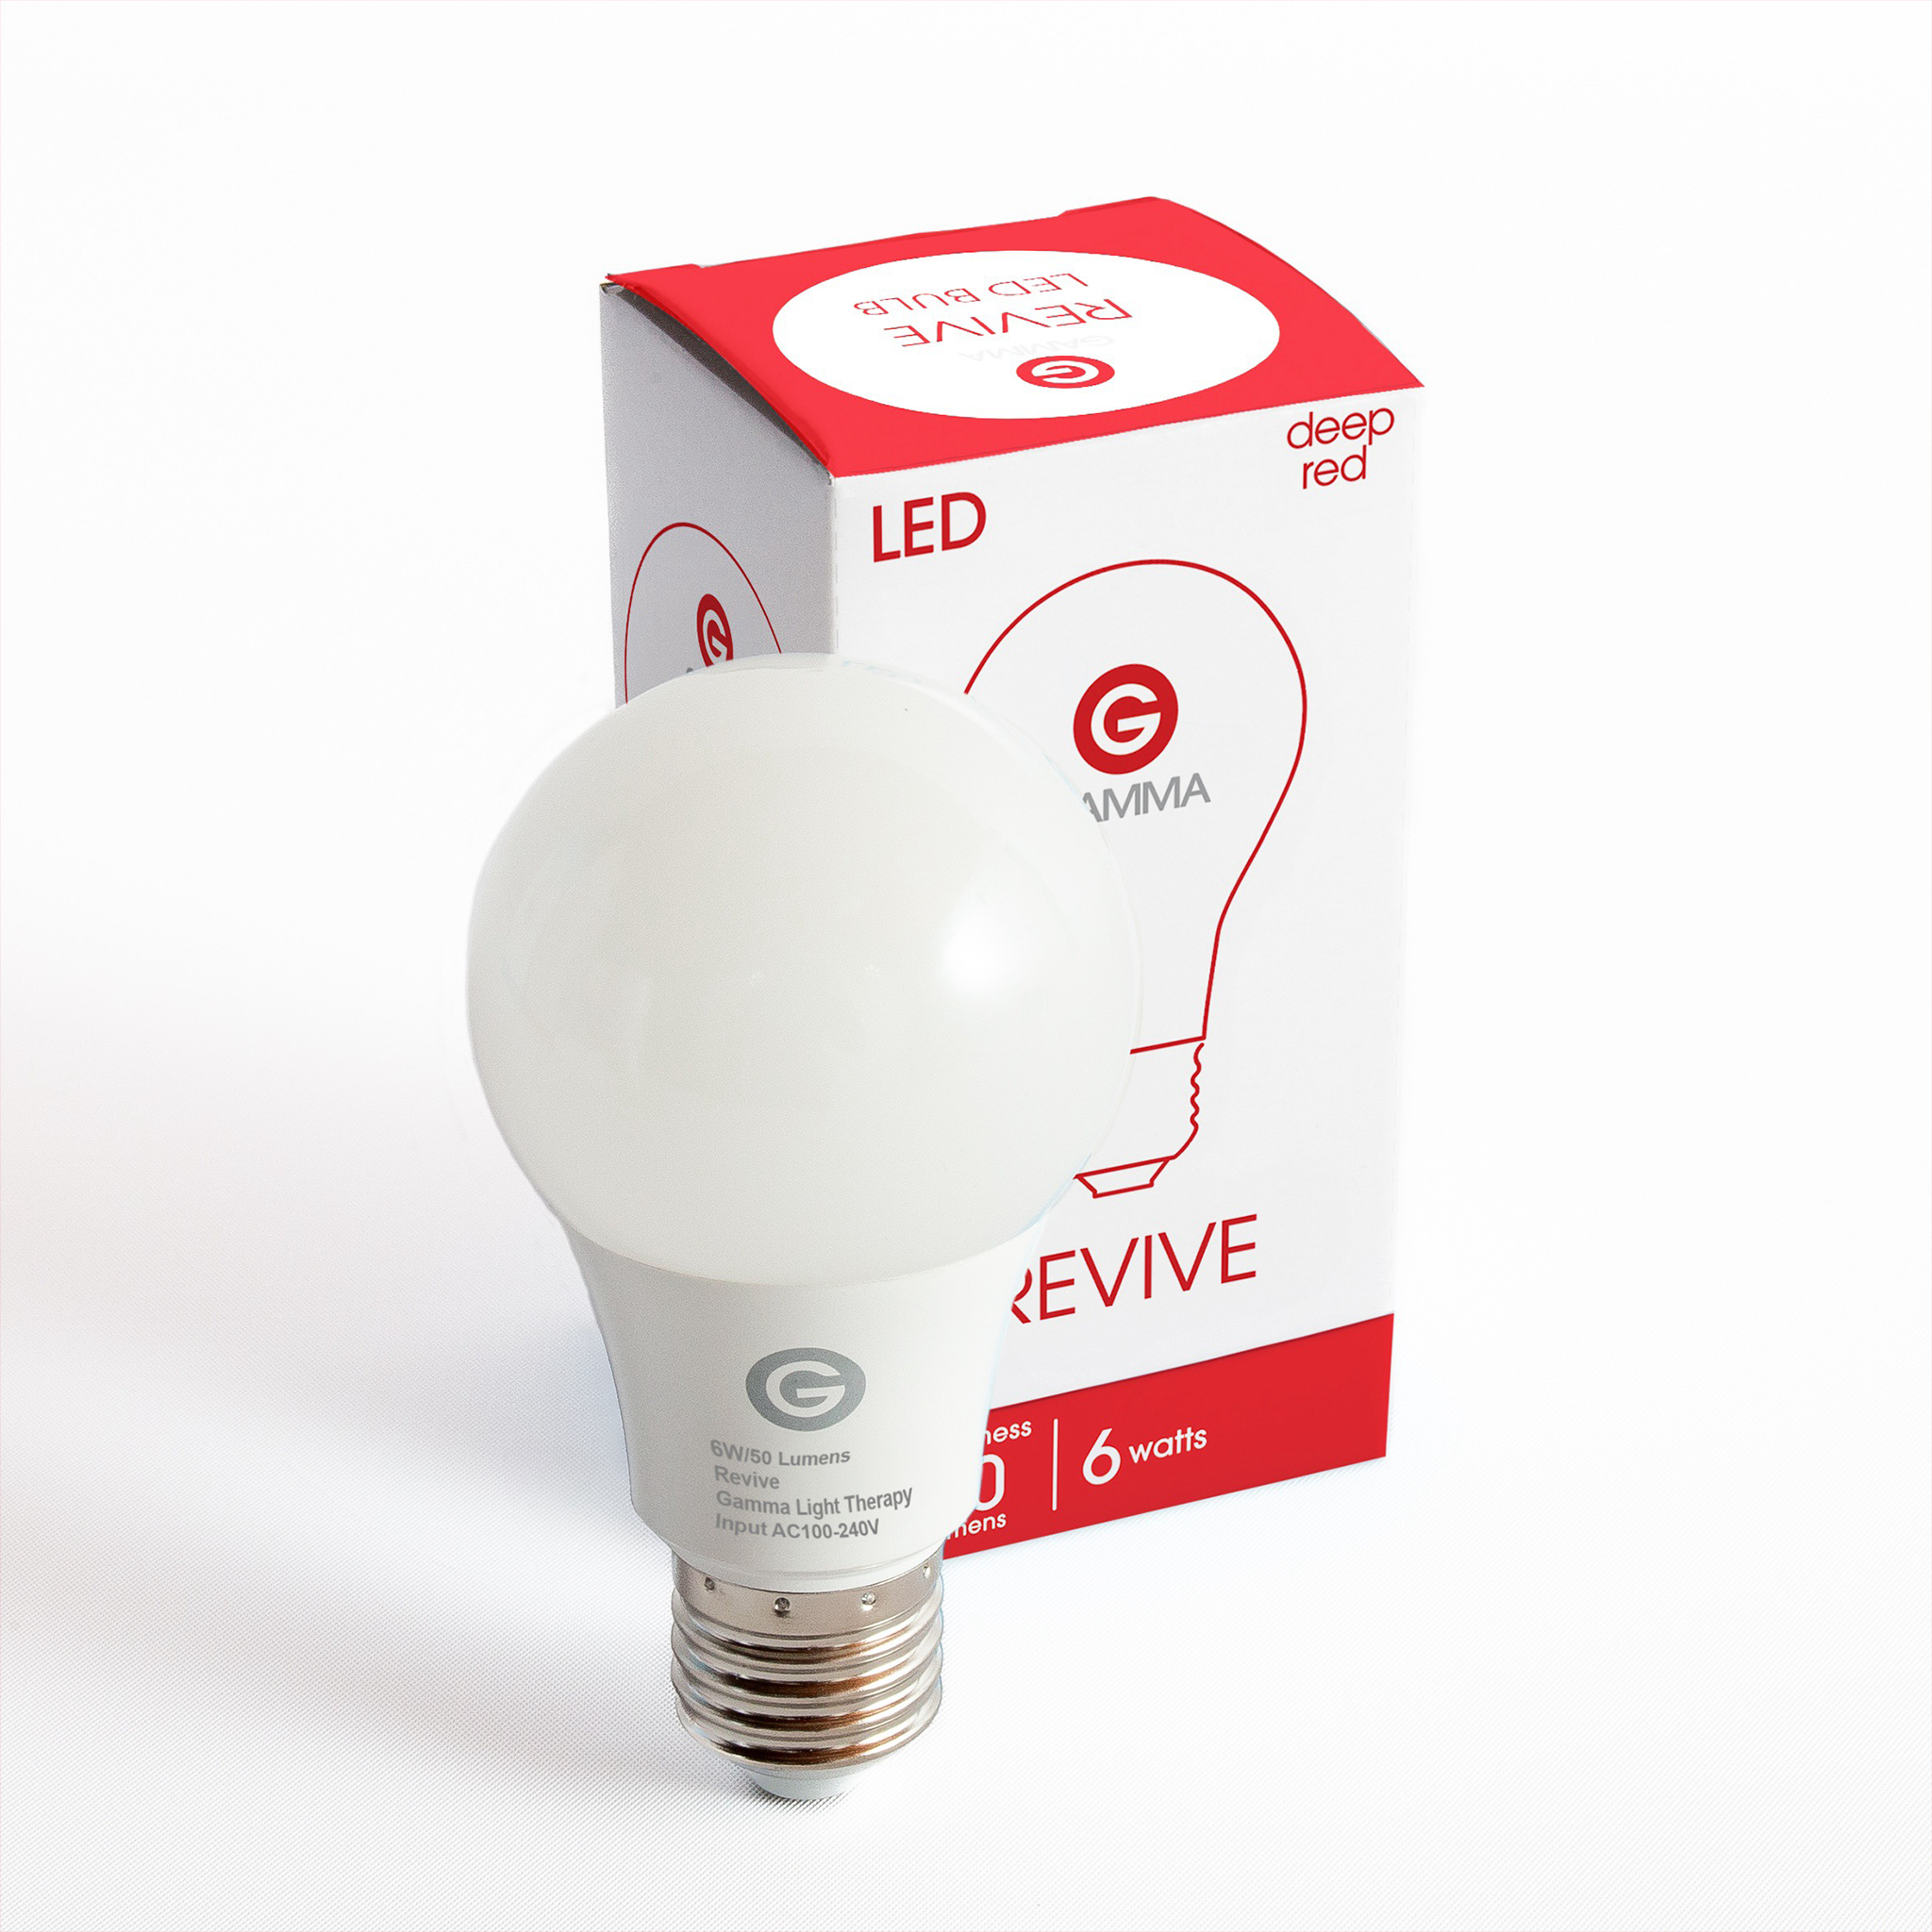 Revive bulb and packaging by gamma